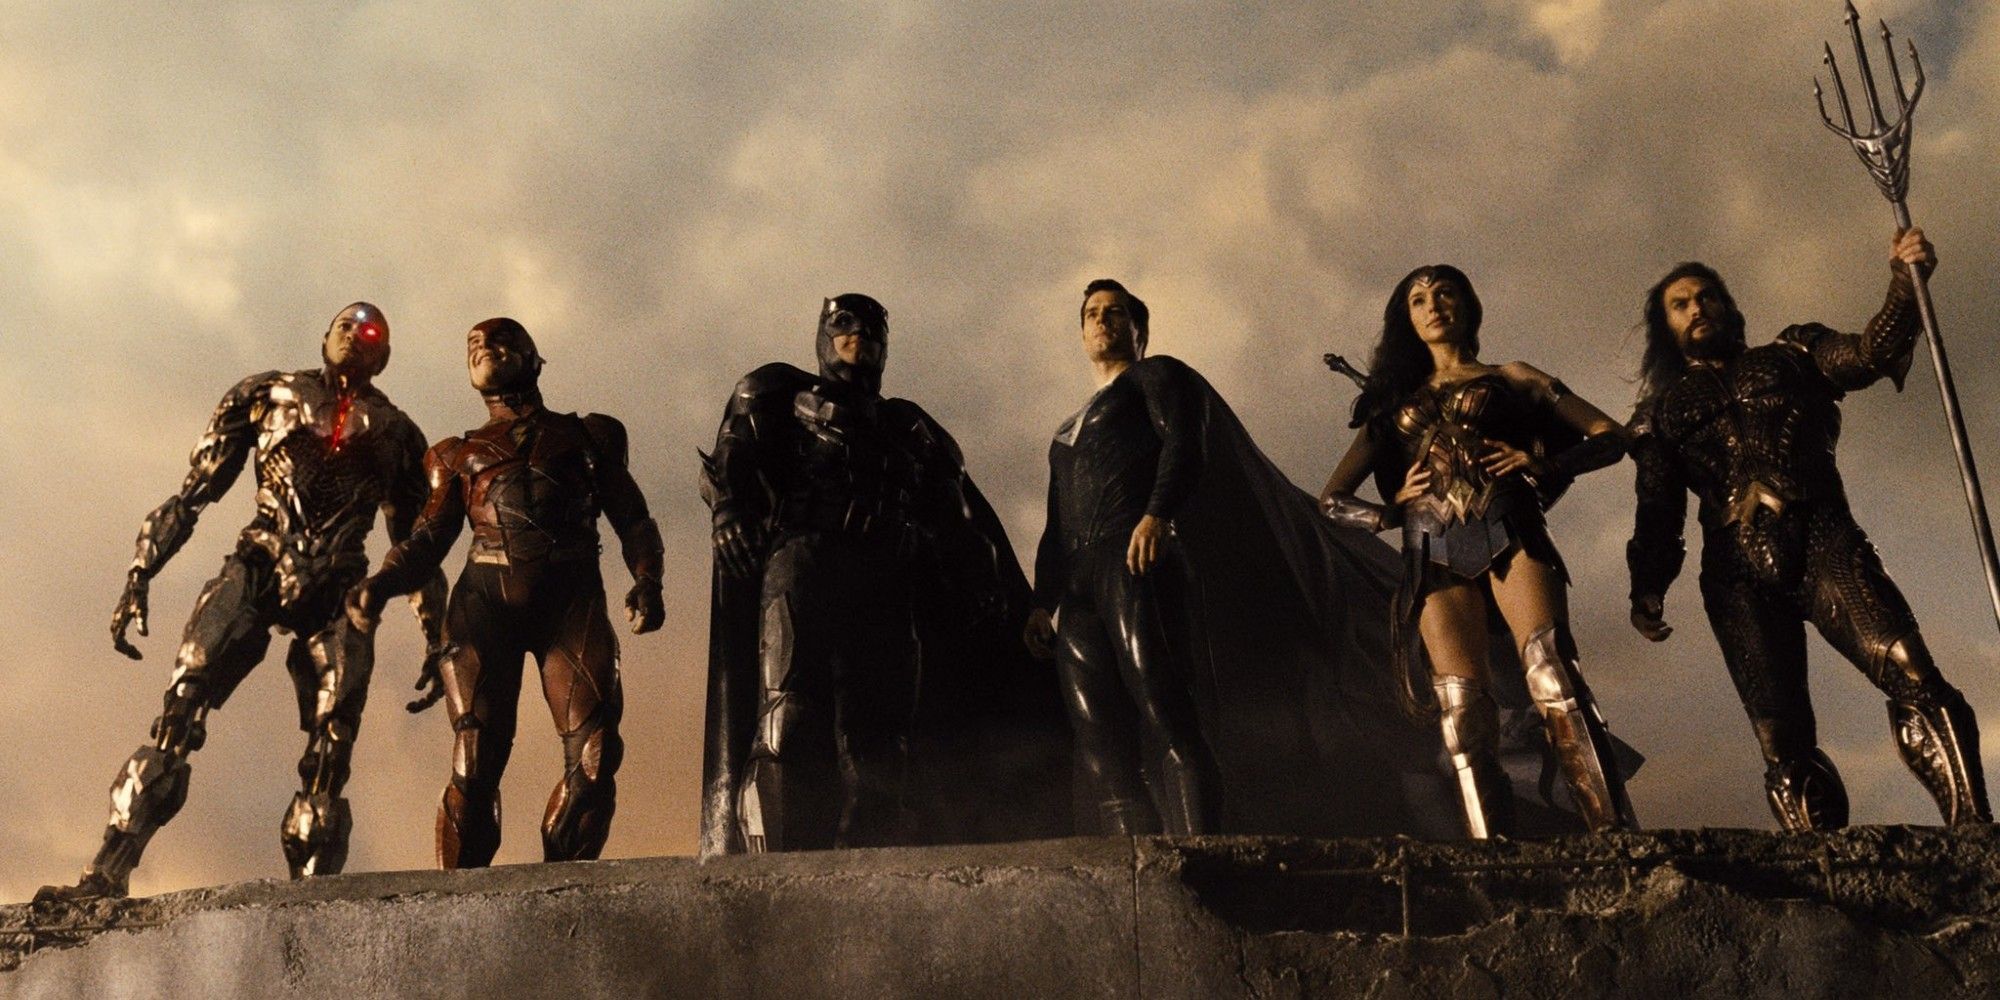 All the heroes standing together in Justice League Snyder Cut 